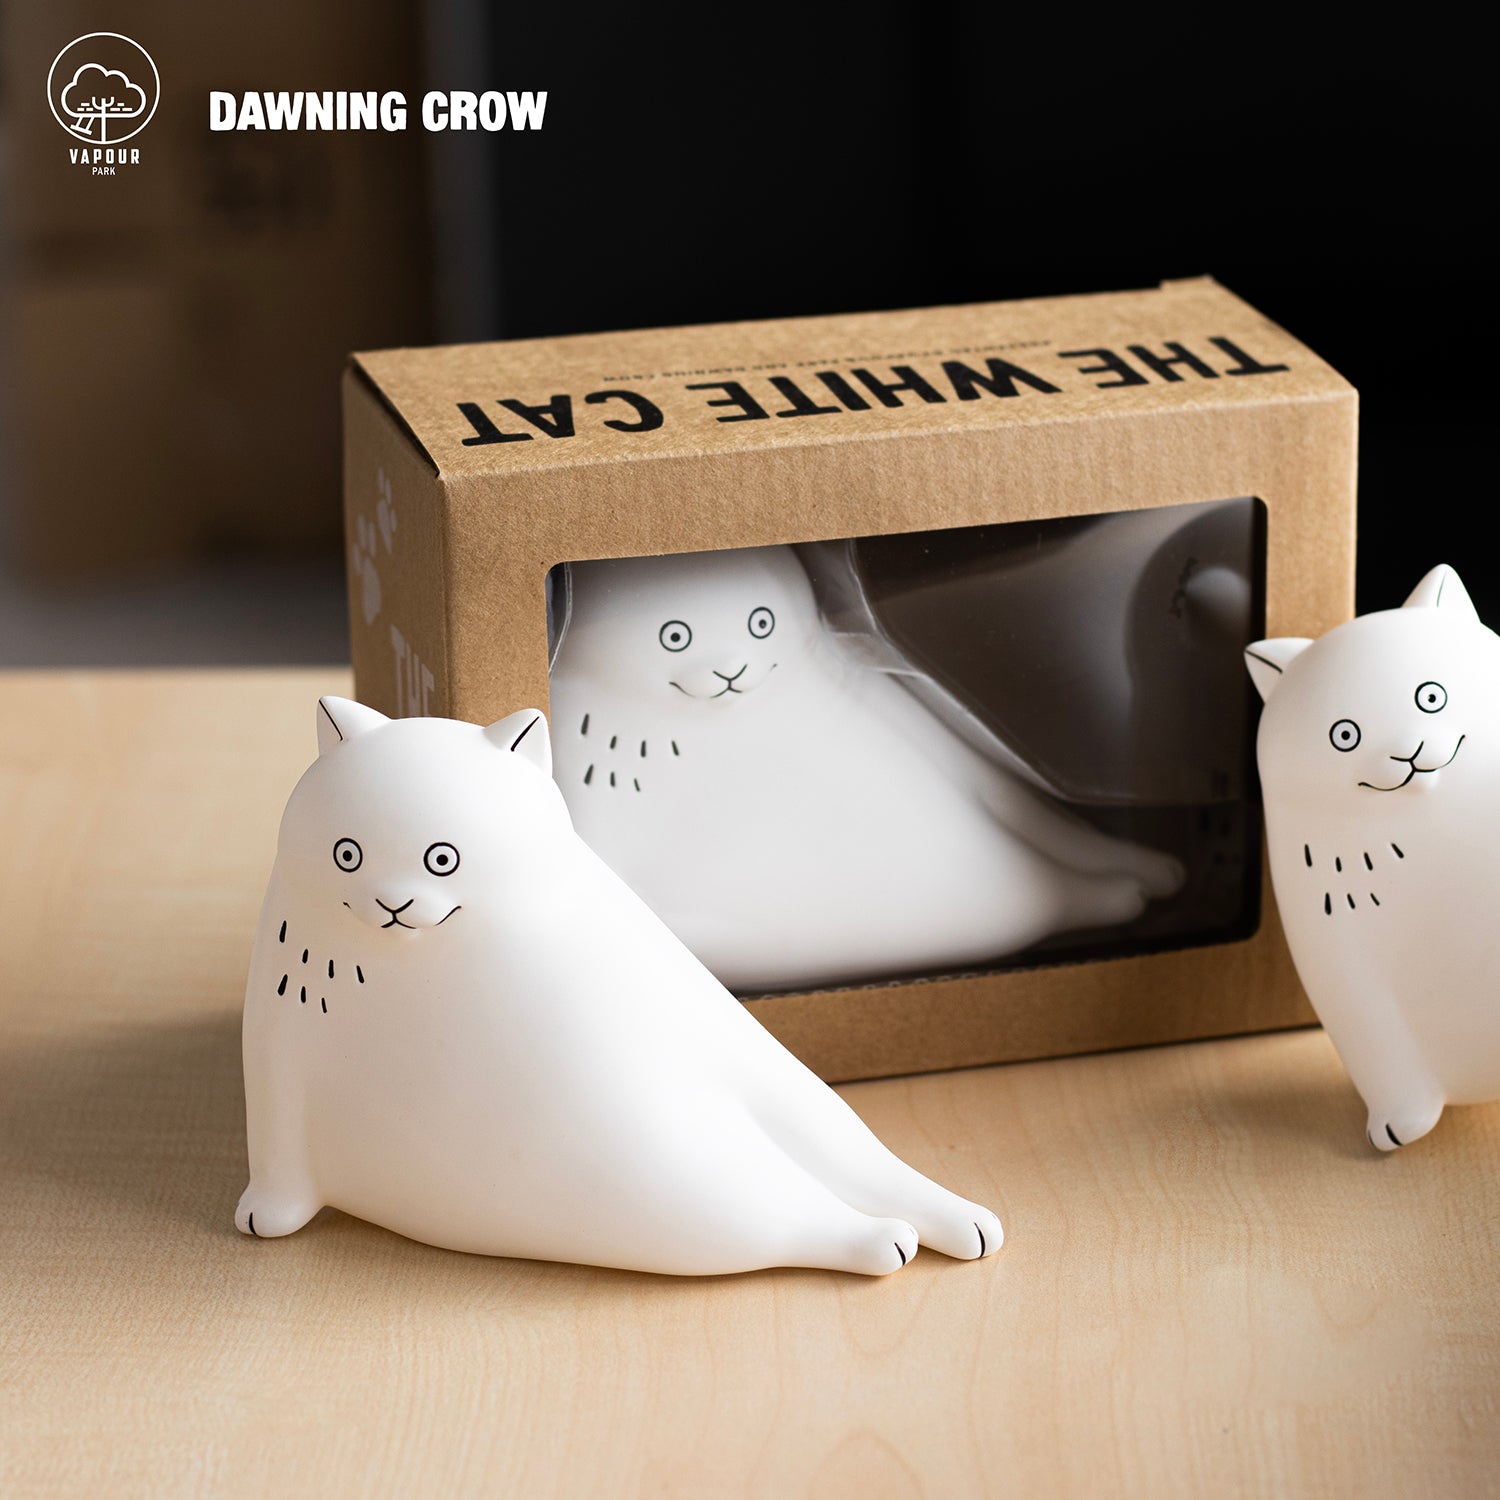 THE WHITE CAT by Dawning Crow - Preorder